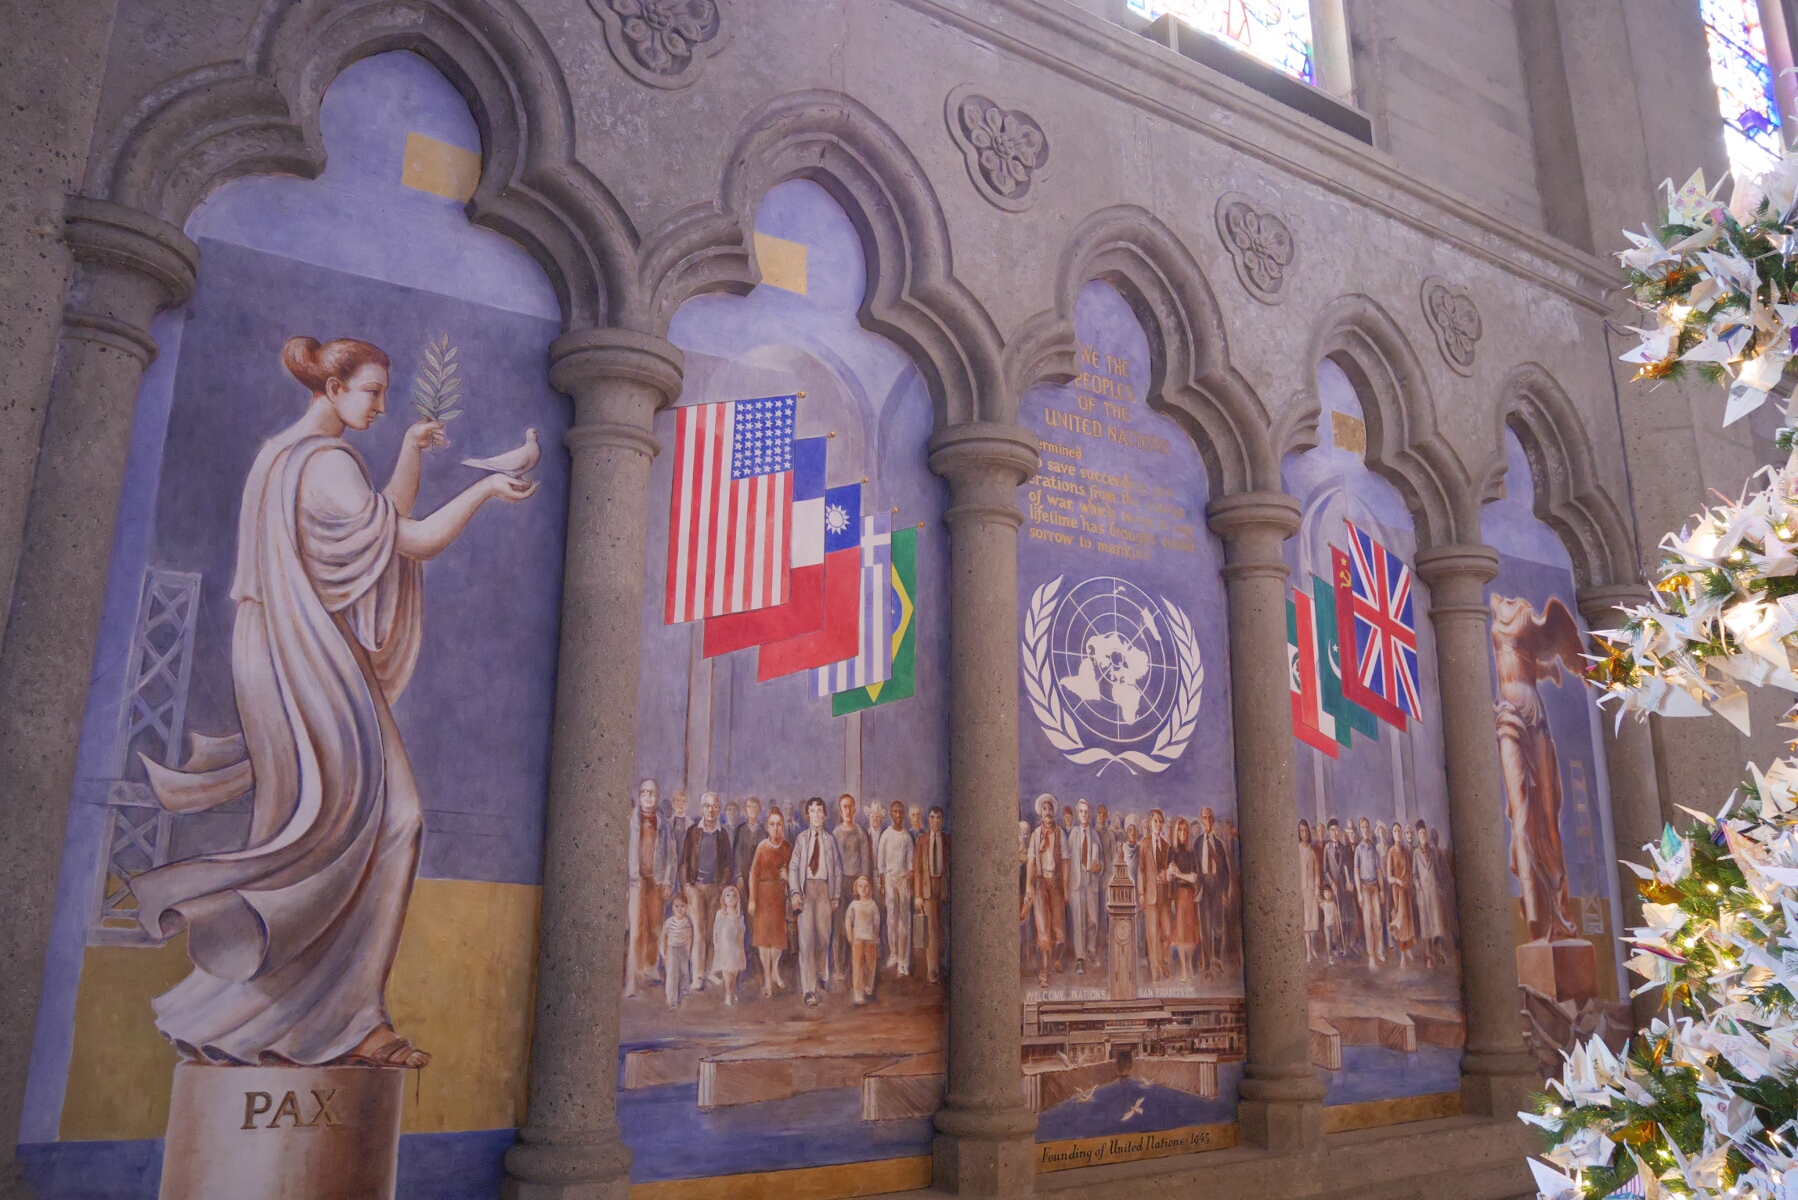 Mural of the founding of the UN (difficult to photograph because a Christmas tree was in the way).